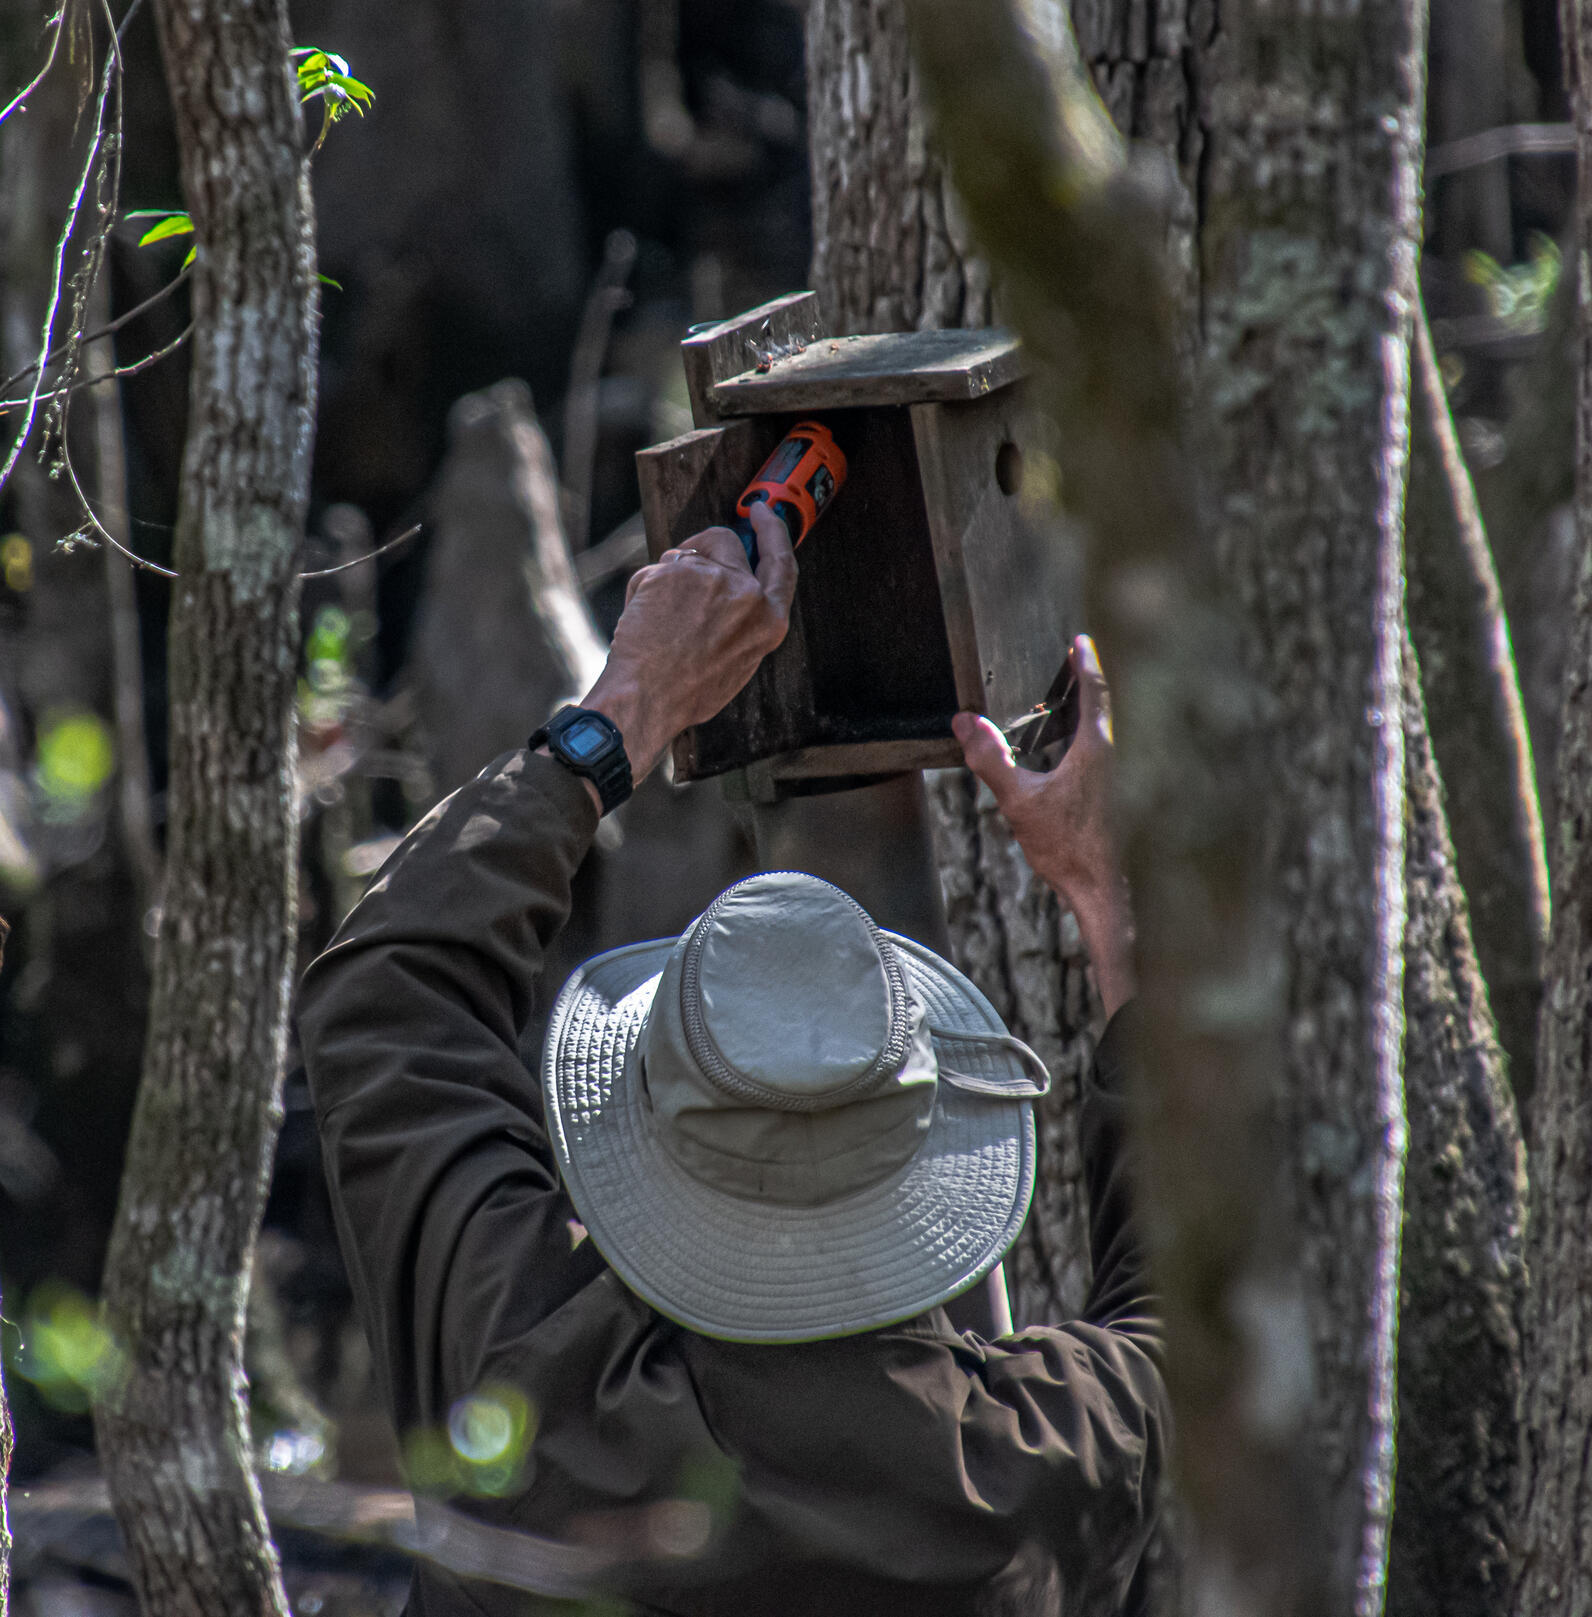 A man is using the orange handle of a screwdriver to clean out any debris in a wooden bird box, painted with camouflage in a swamp. He is wearing a beige hat and brown jacket, 